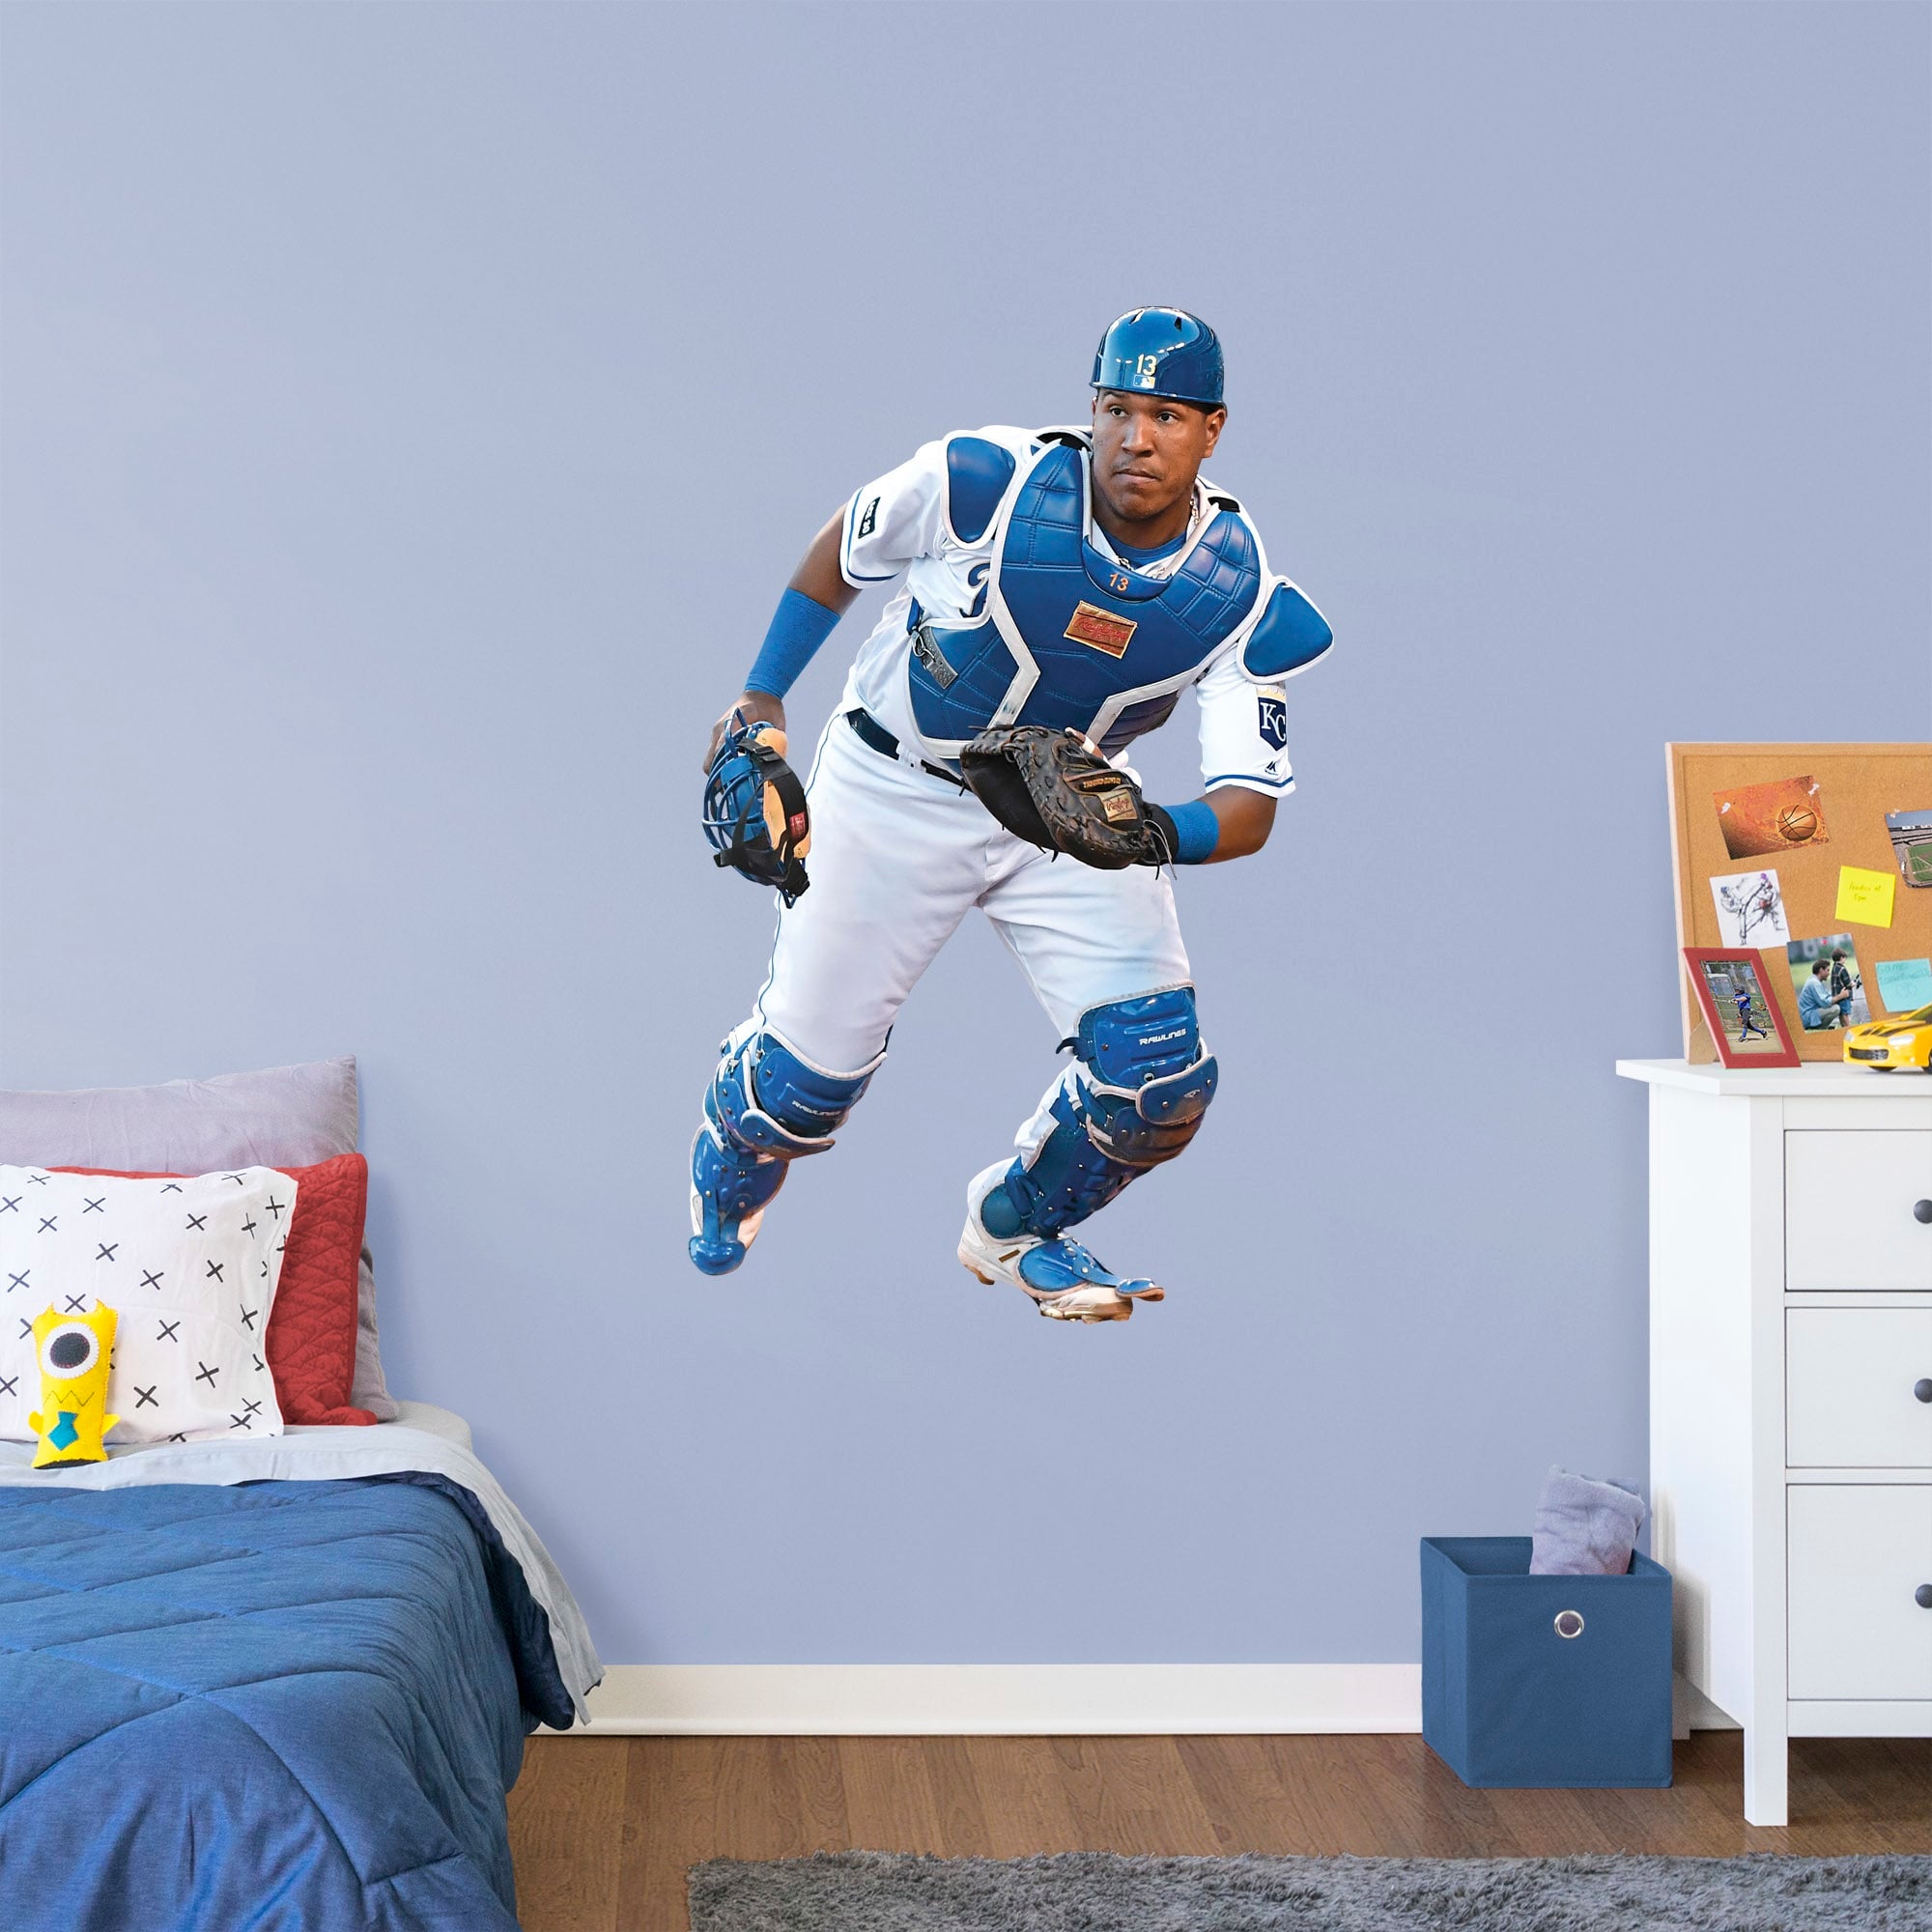 Salvador Perez for Kansas City Royals: Catcher - Officially Licensed MLB Removable Wall Decal Giant Athlete + 2 Decals (33"W x 5